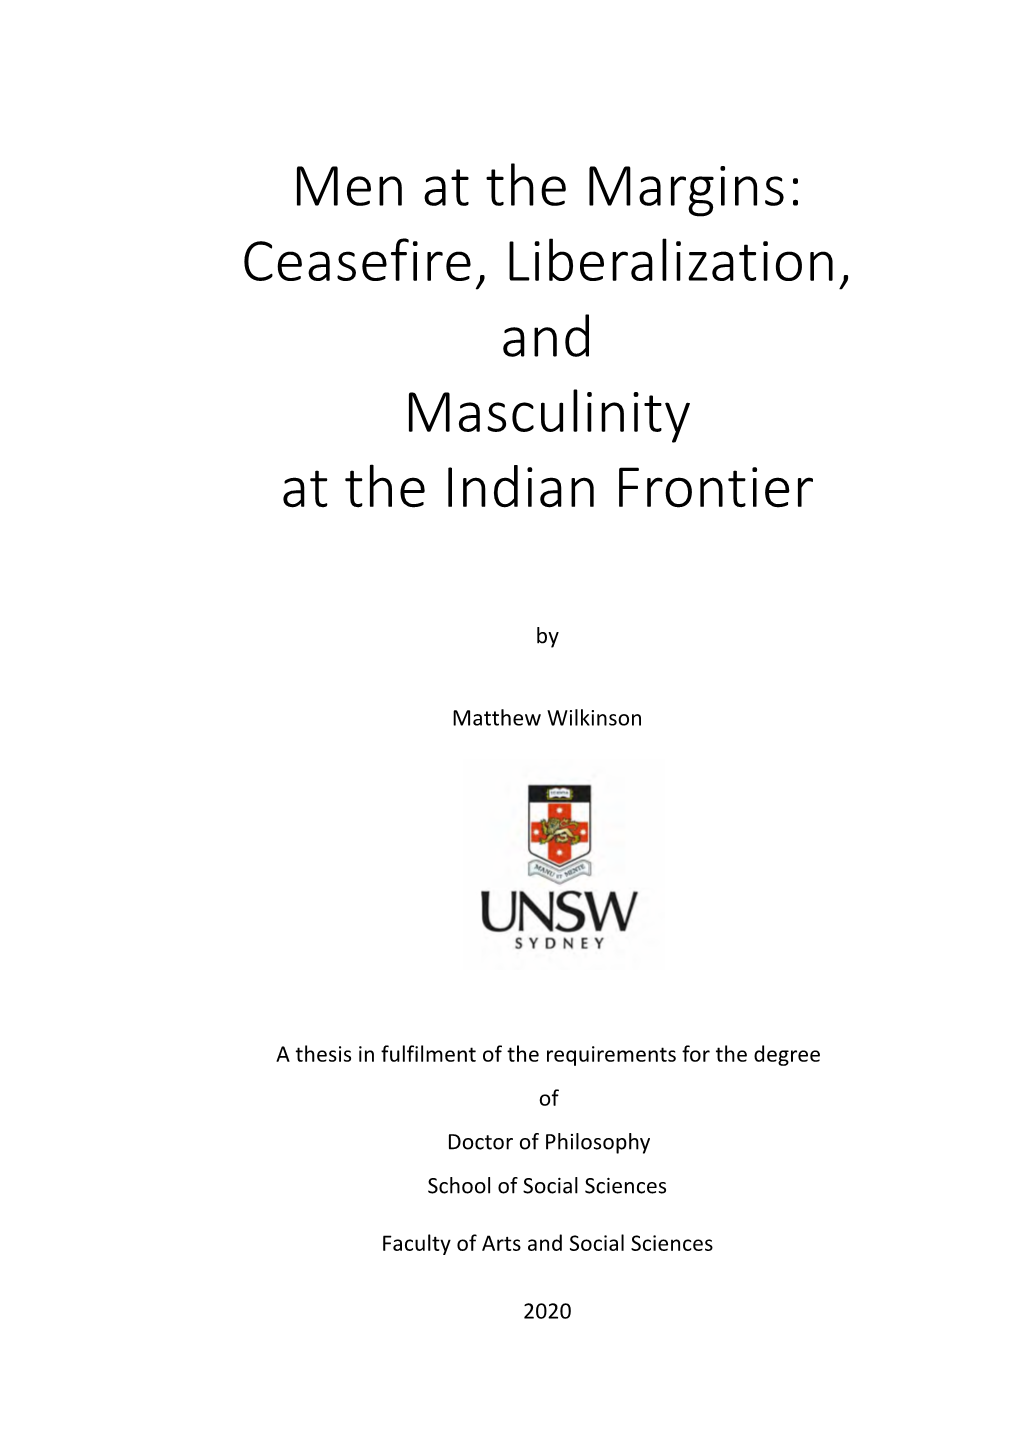 Ceasefire, Liberalization, and Masculinity at the Indian Frontier